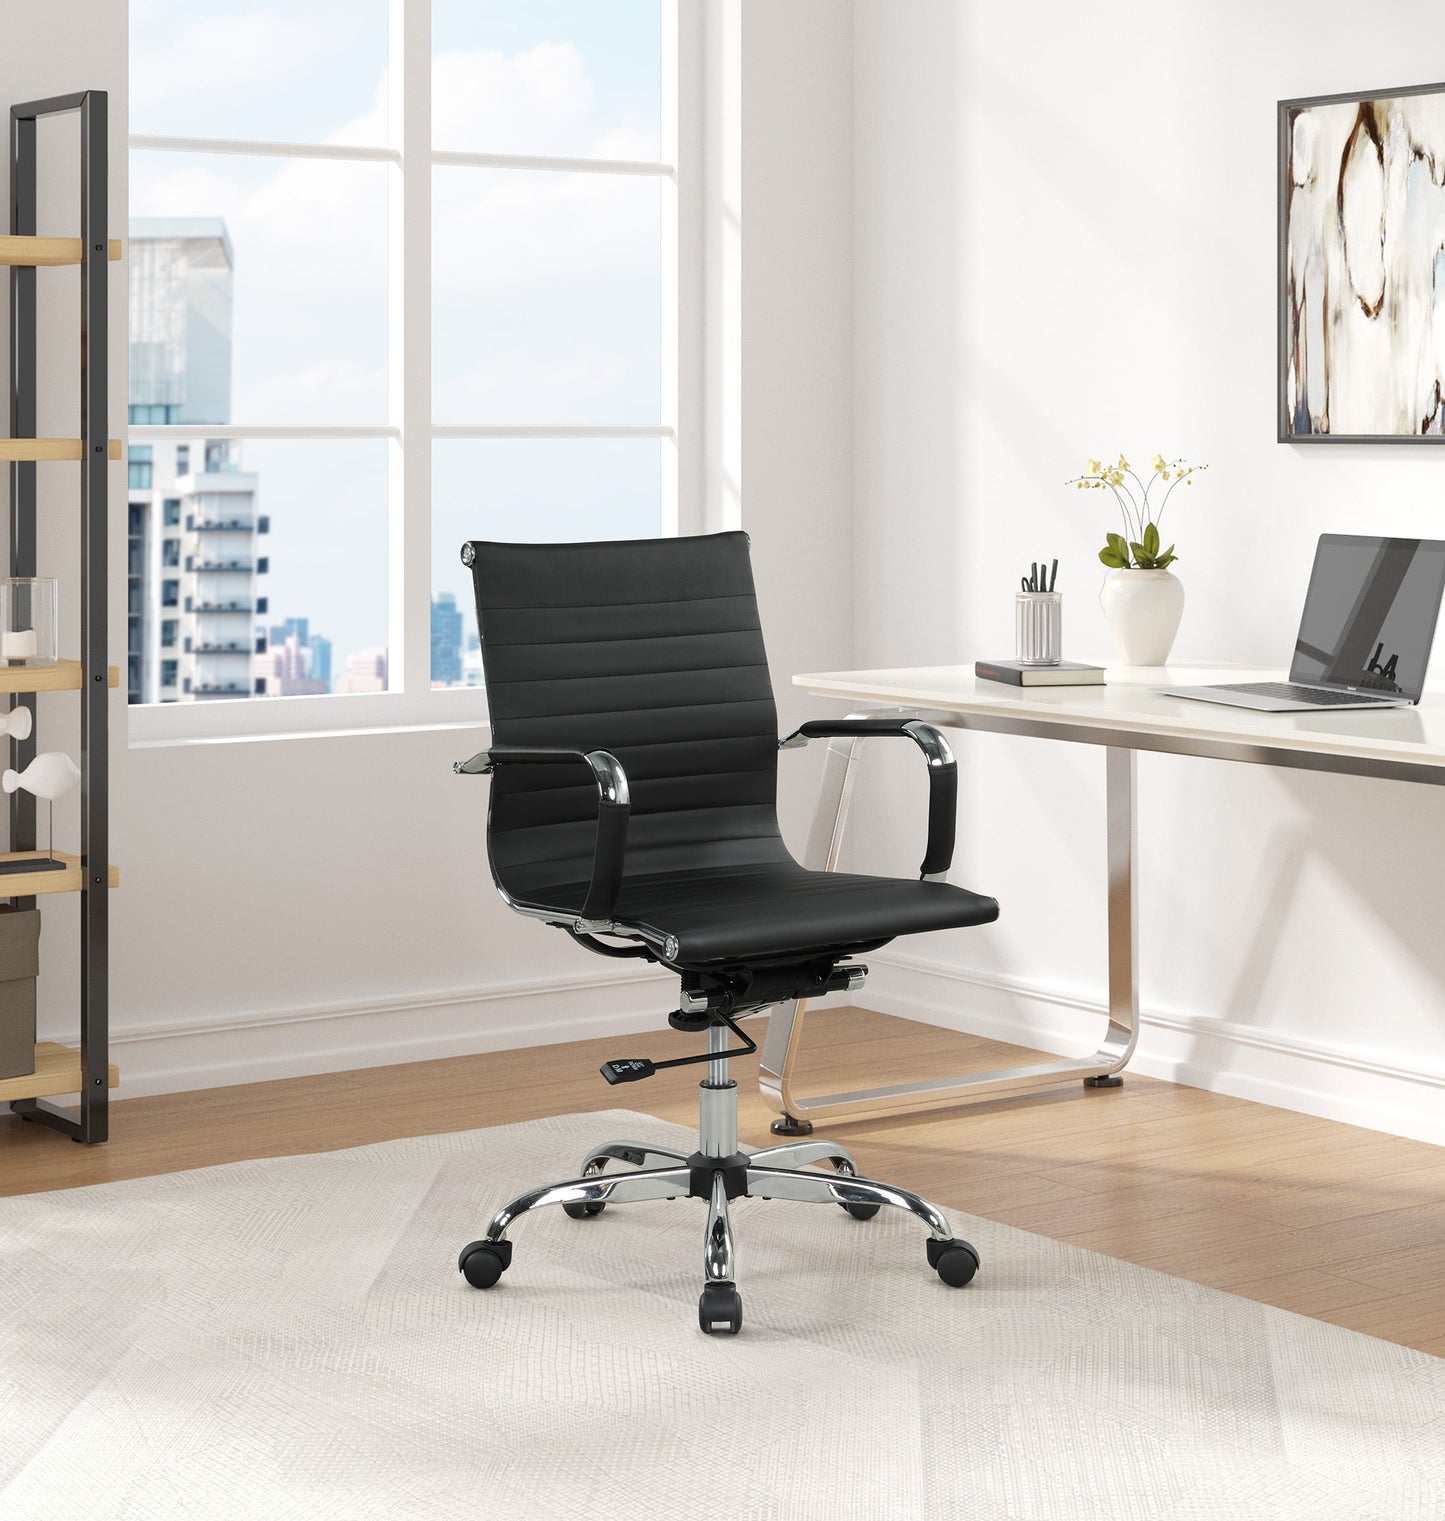 Leather Office Chair - Lifestyle Bravo